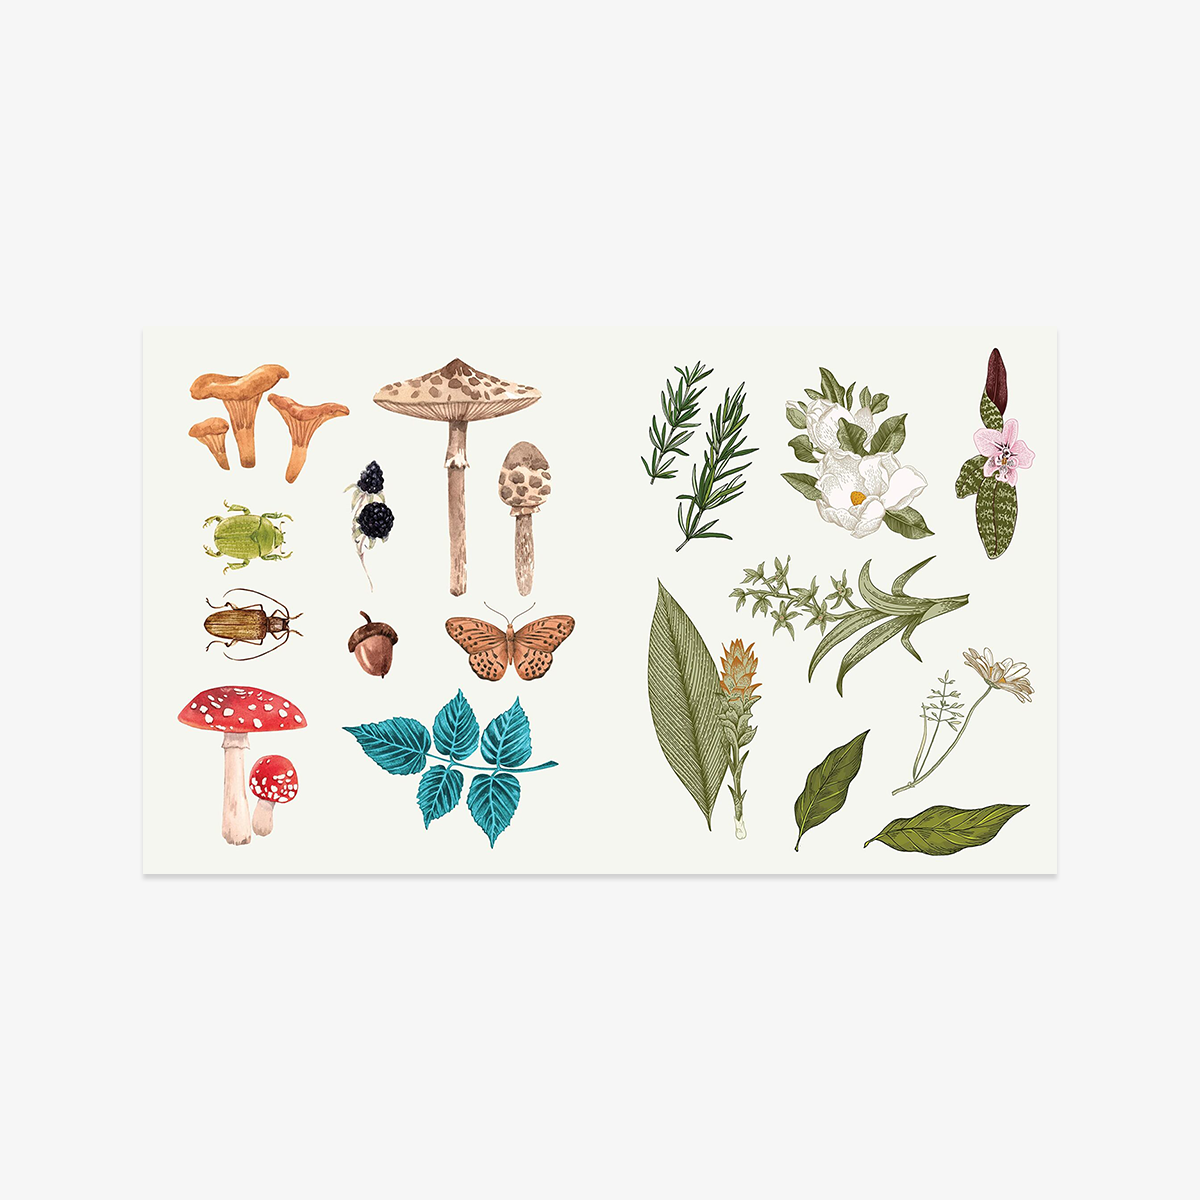 files/9781250279347_Apothecary_StickerStudio_02.png